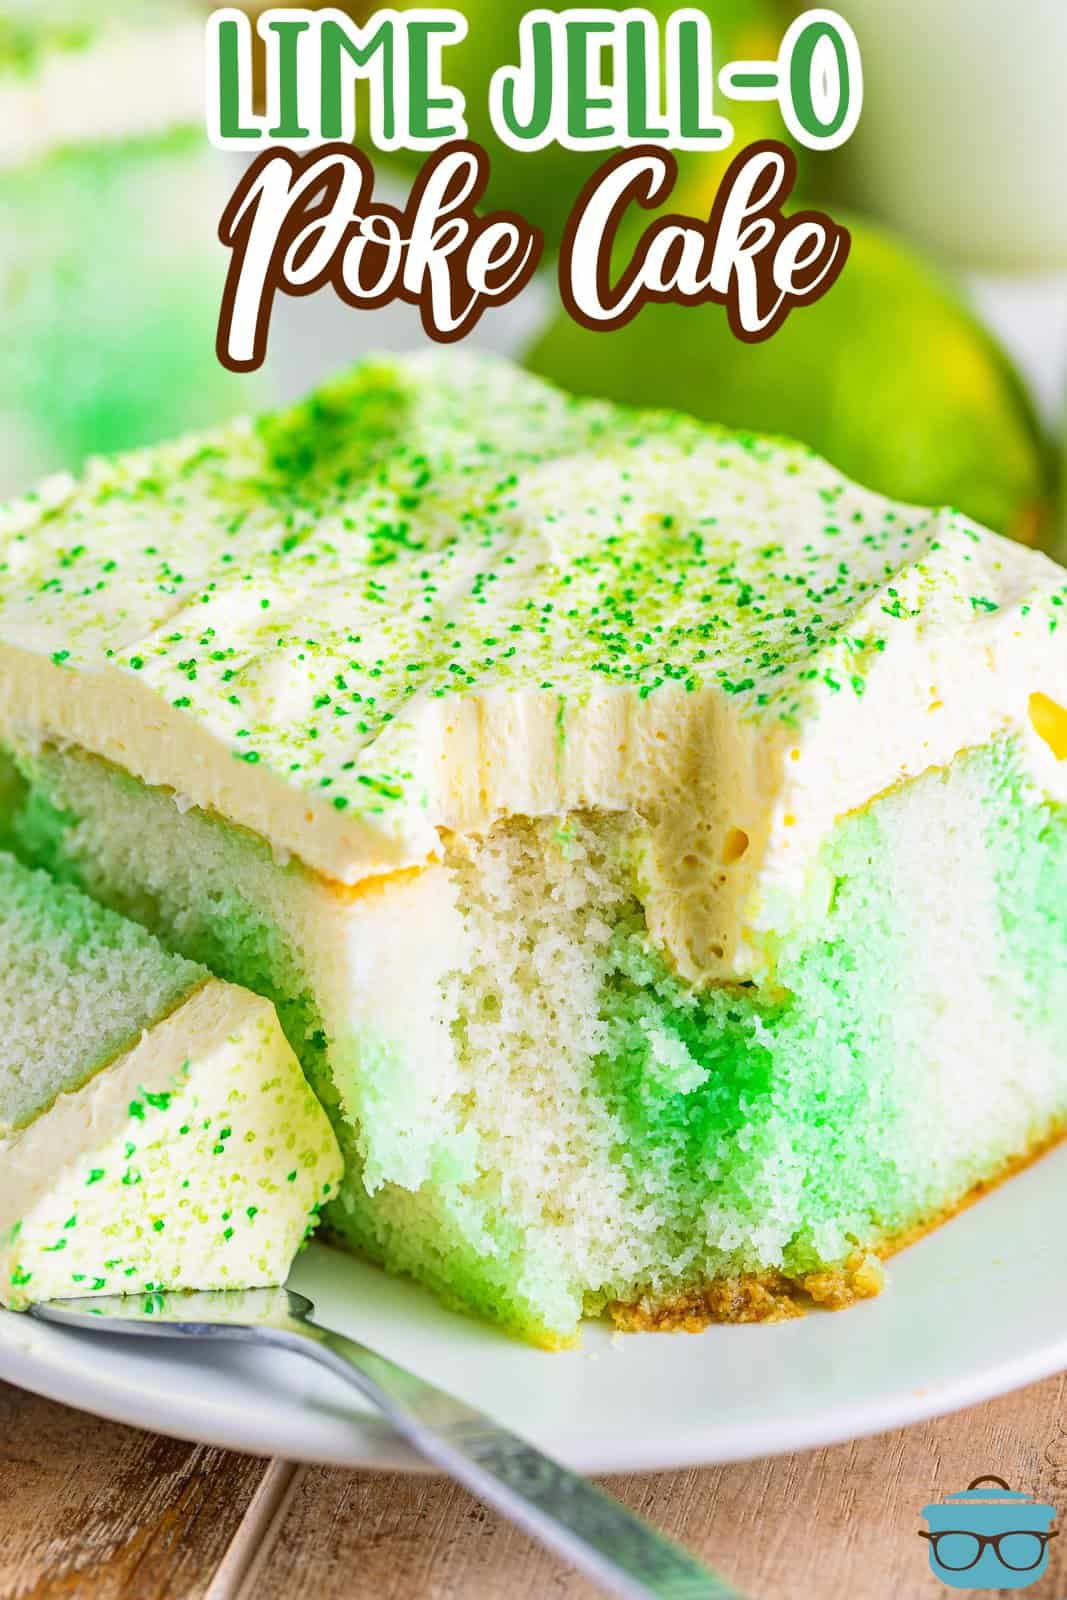 A slice of Lime Jell-O Poke cake with a fork that and a bite missing.